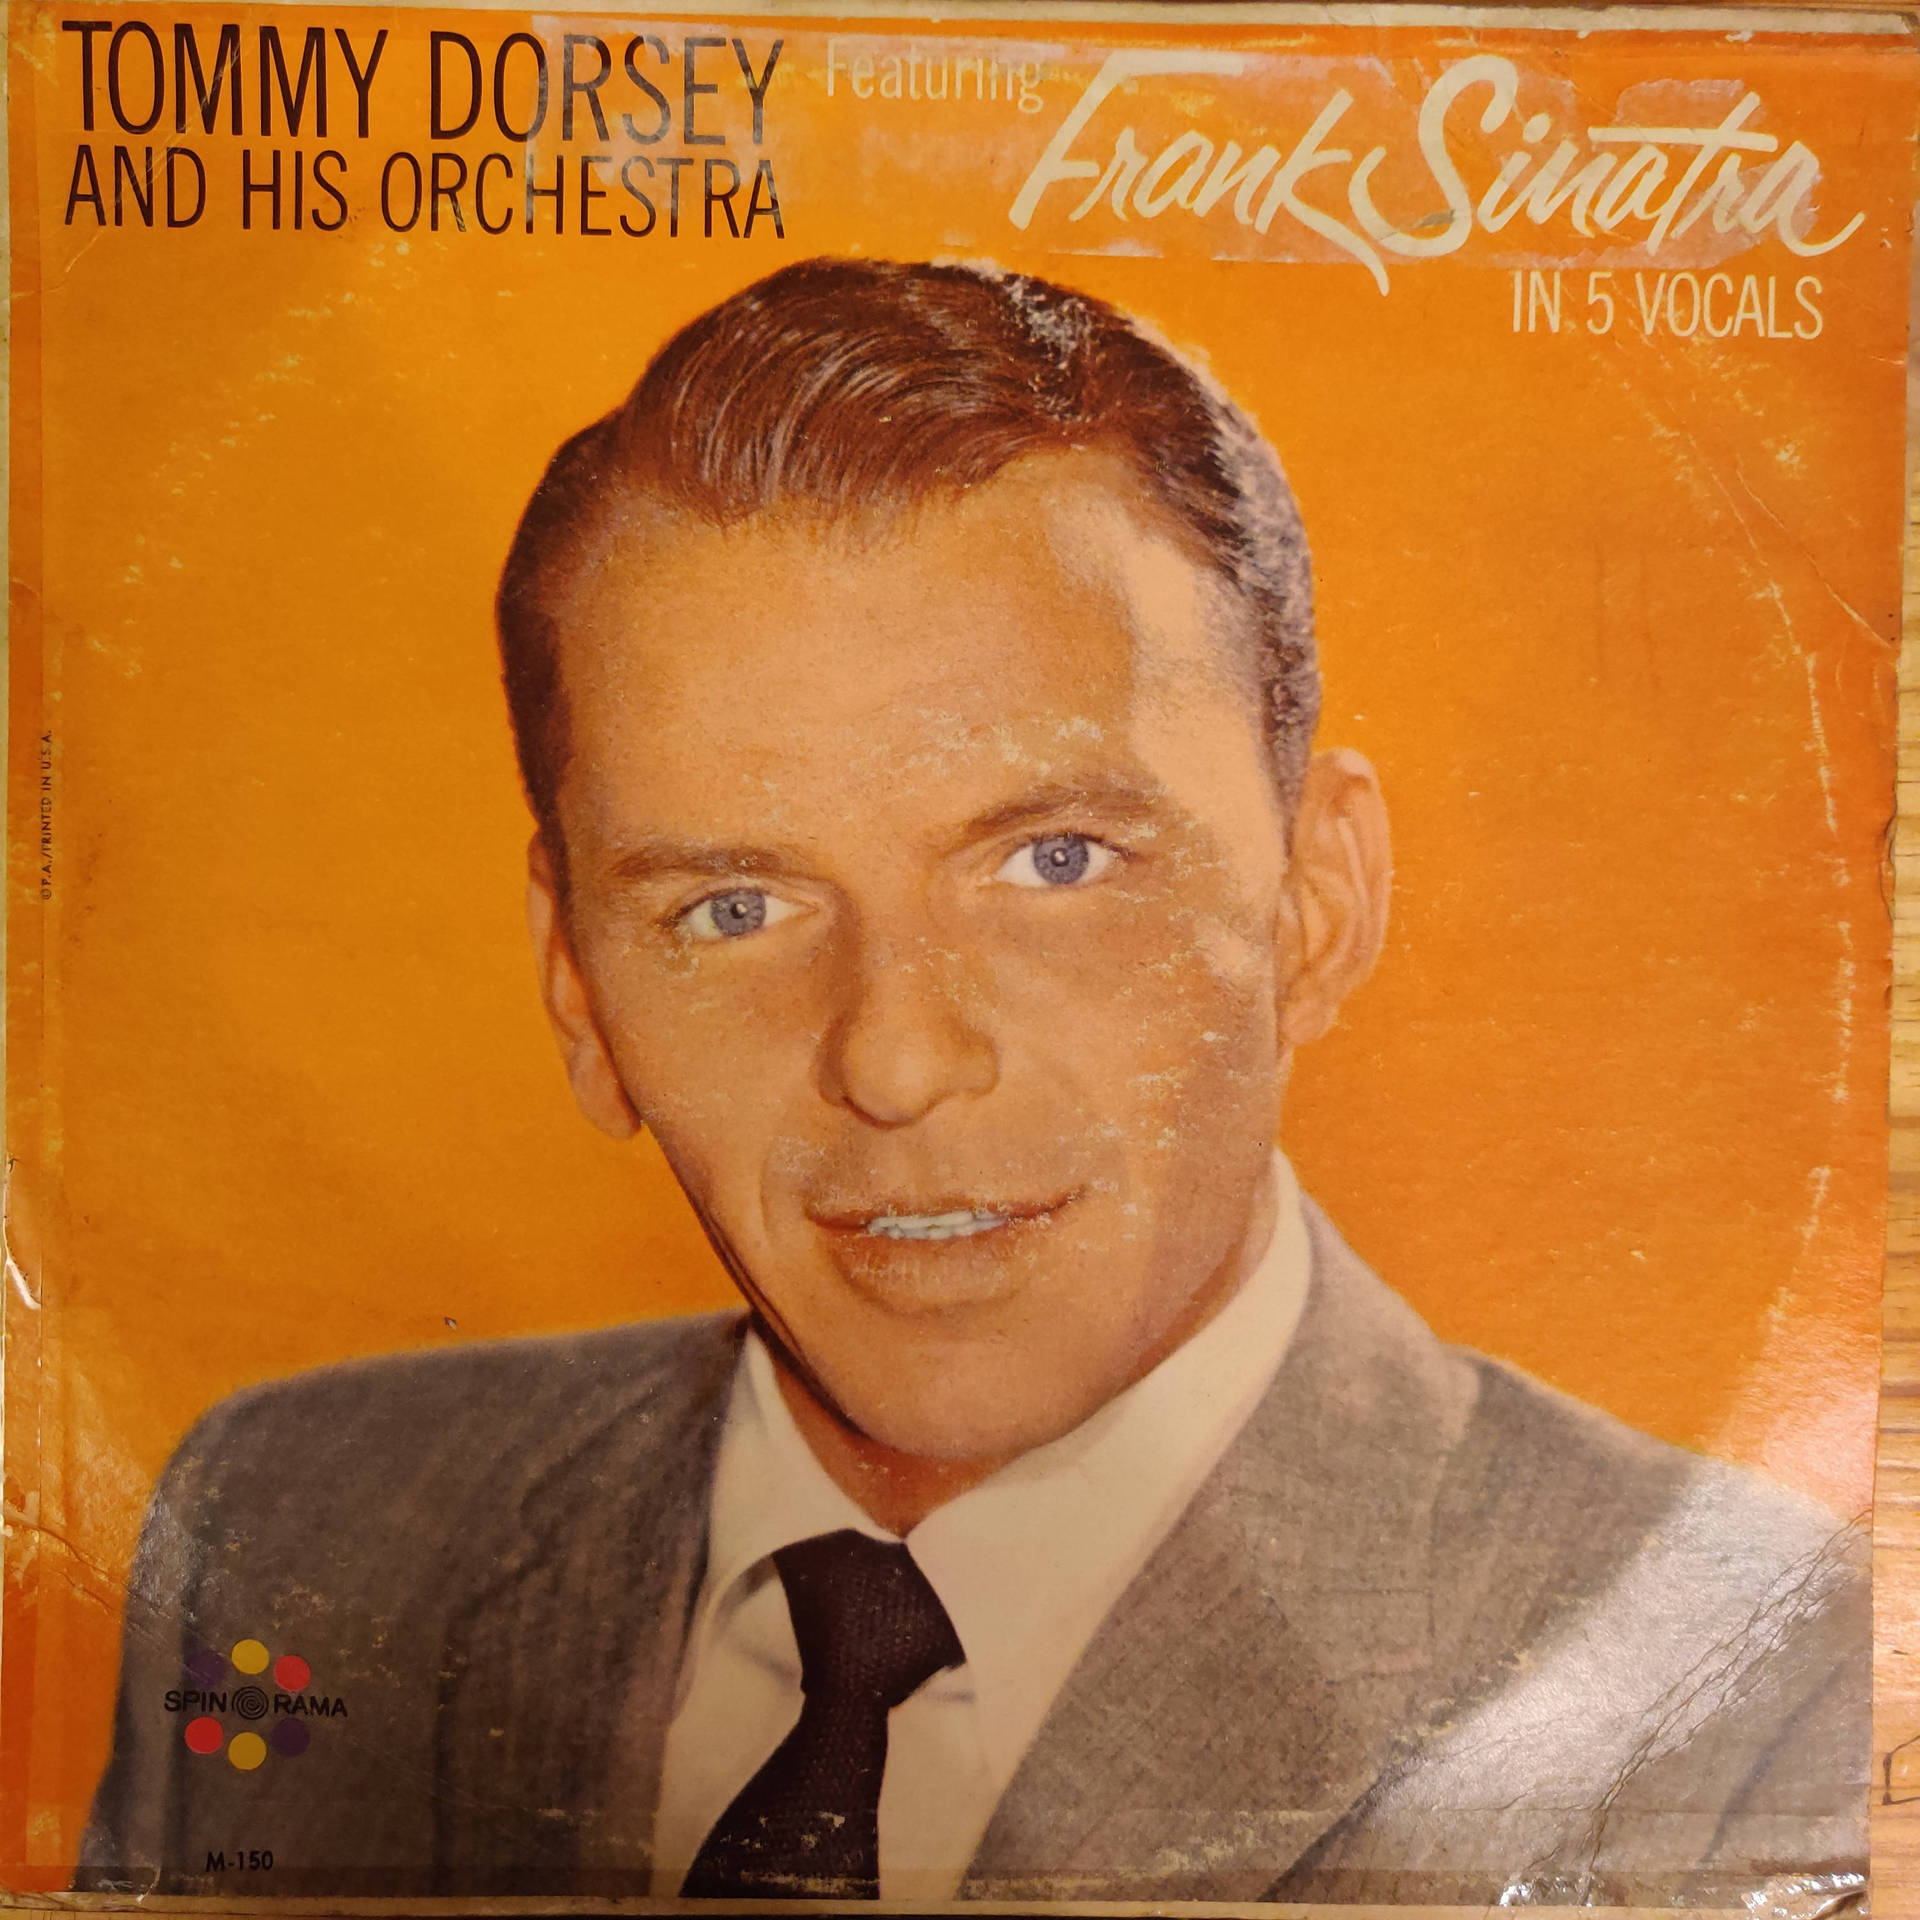 Tommy Dorsey And His Orchestra Frank Sinatra Album Wallpaper